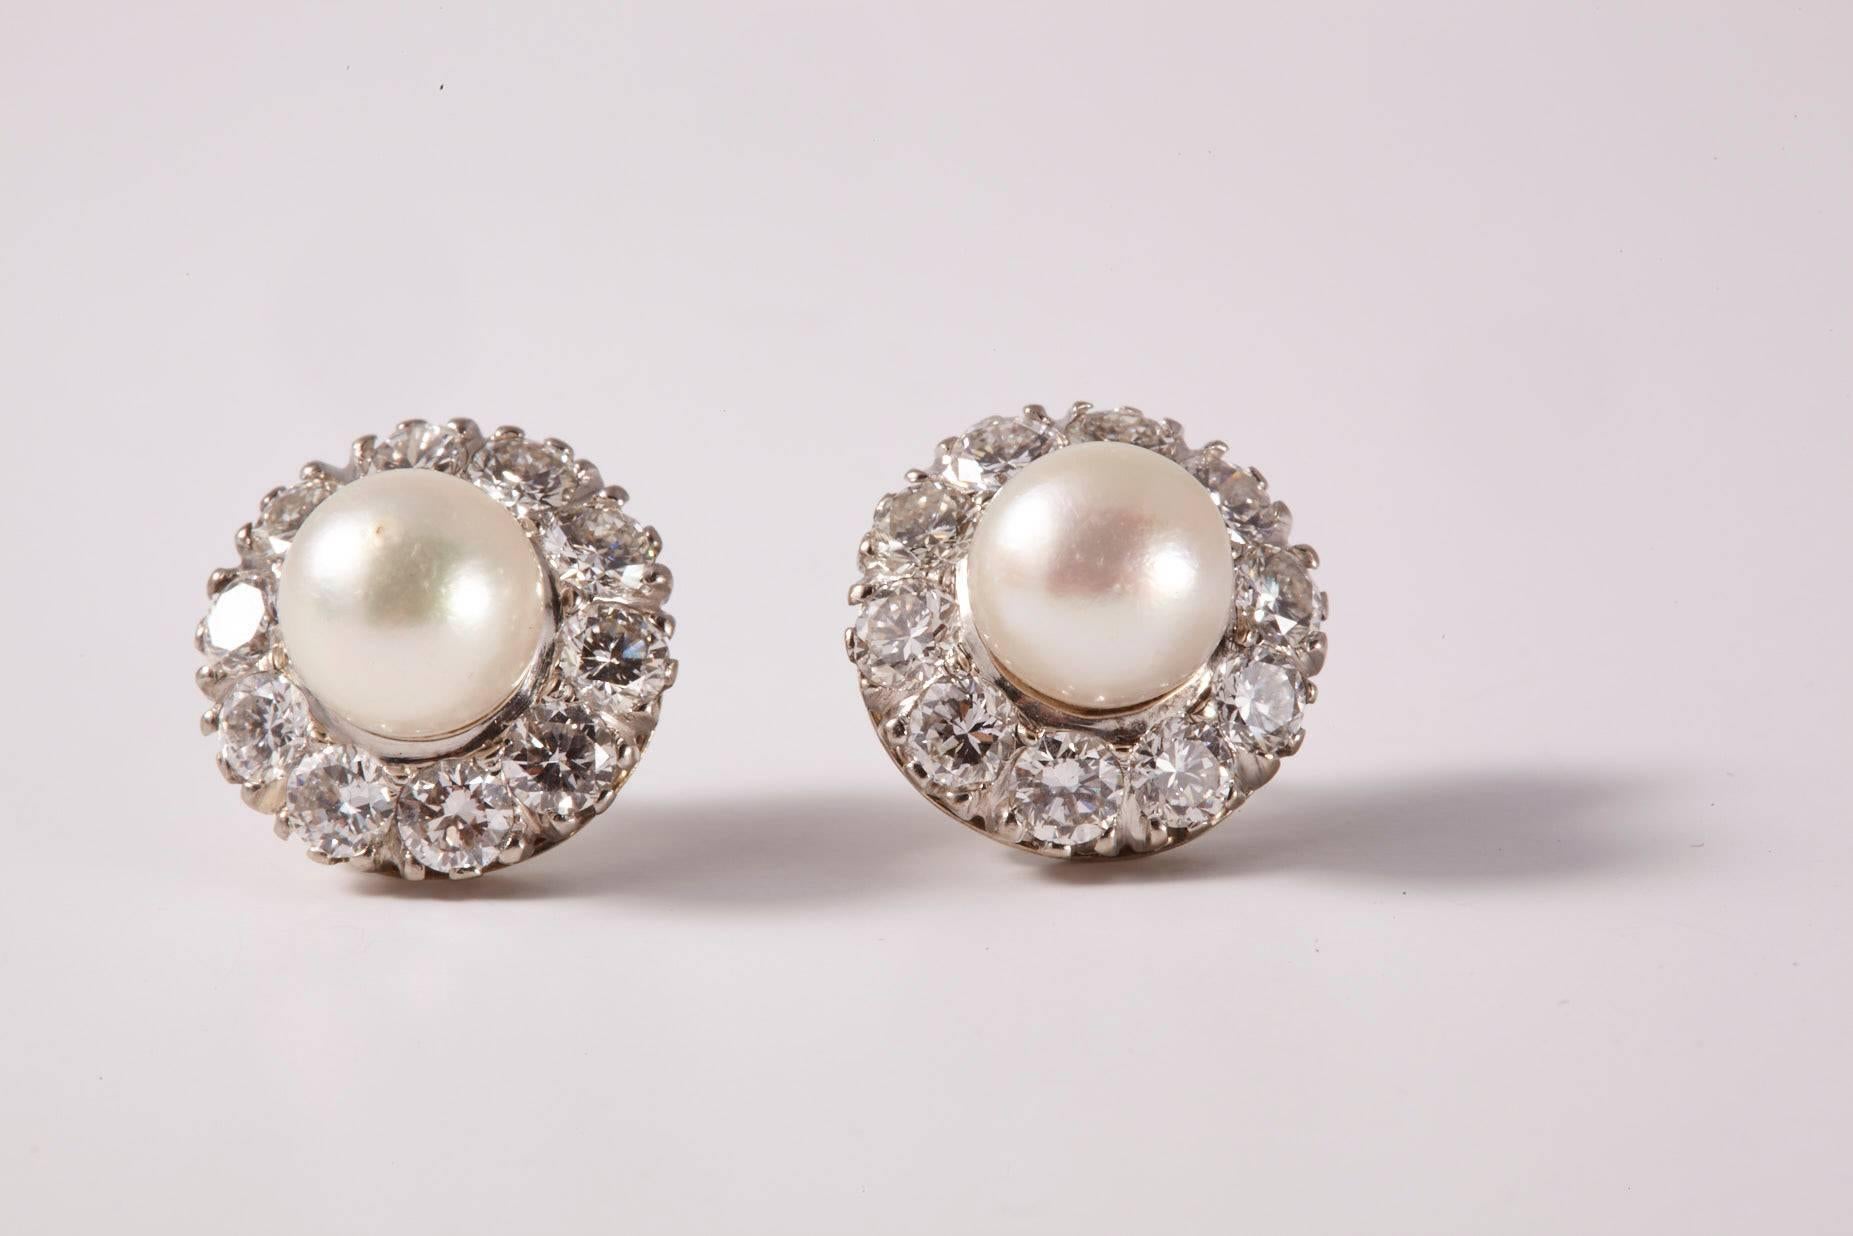 18 Karat White Gold Pearl and Diamond Earrings, 8mm SS White Pearl surrounded by 10 colorless VS Diamonds. Approximately 3ct total weight. 
A classic design for these pearl stud earrings; breathtaking, brilliant diamonds, a perfect layout, and very